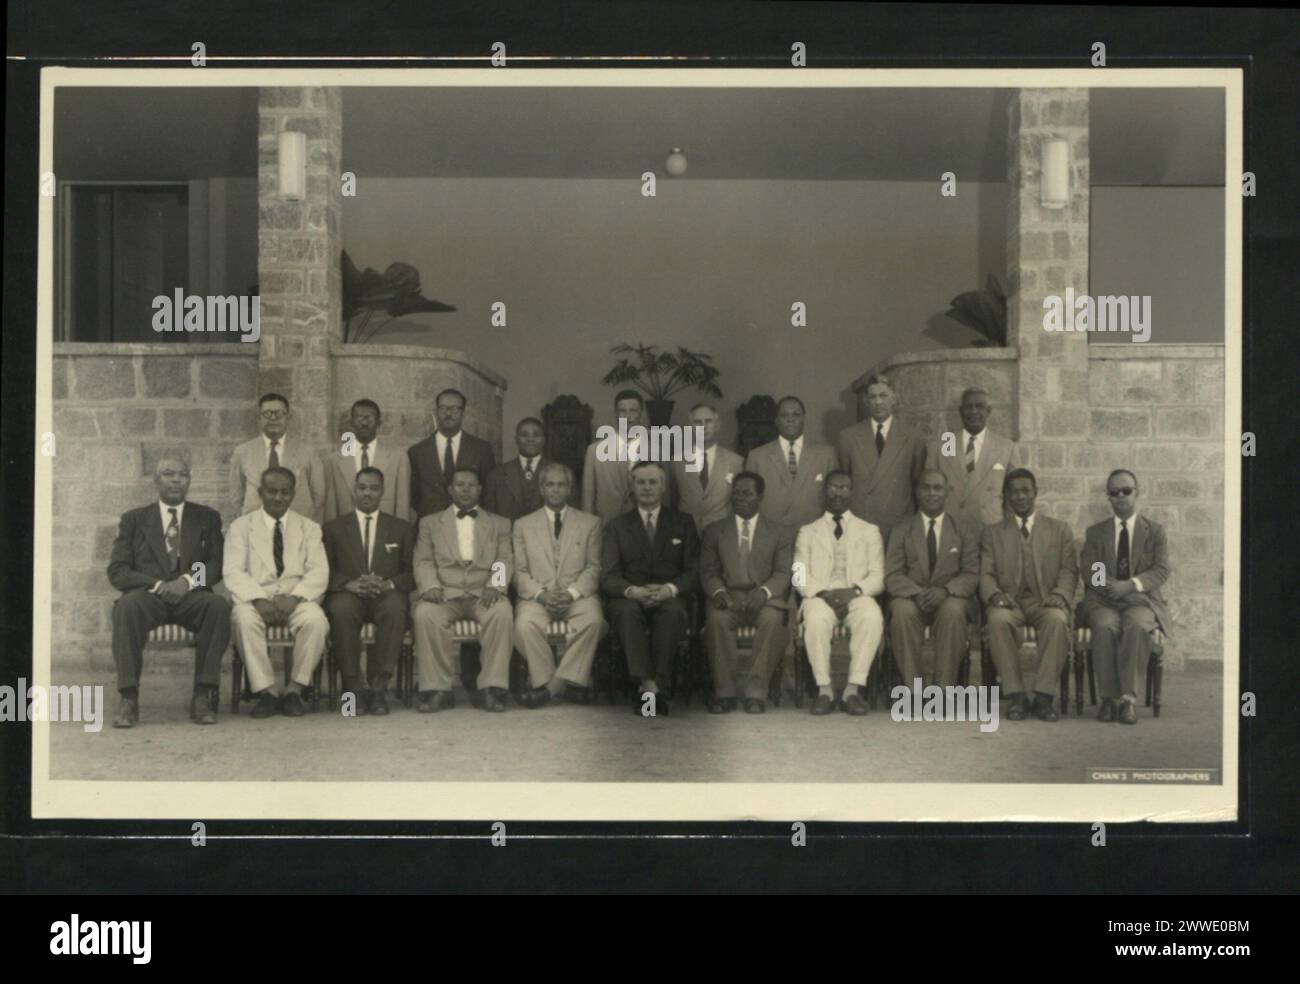 Description: Members of the Governor-General's Advisory Council photographed at Governor-General's House during the meeting in January, 1958. Standing (left to right): Sir Archibal Cuke (Barbados), Hon. B. Benn (British Guiana), Hon. R.G. Mapp (Barbados), Mr. E.L. Allen (Jamaica), Mr. J.S. Moerdecai (Federal Secretary), Mr. C. Wylie (Federal Attorney General), Hon. F.A. Glasspole (Jamaica), Mr. L.N. Blache-Fraser (Federal Financial Secretary), Hon. W.J. Alexander (Trinidad). Sitting (left to right): Hon. V.C. Bird (Antigua), Hon. Sir Grantley Adams (Barbados), Hon. F.A. Baron (Dominica), Hon. Stock Photo